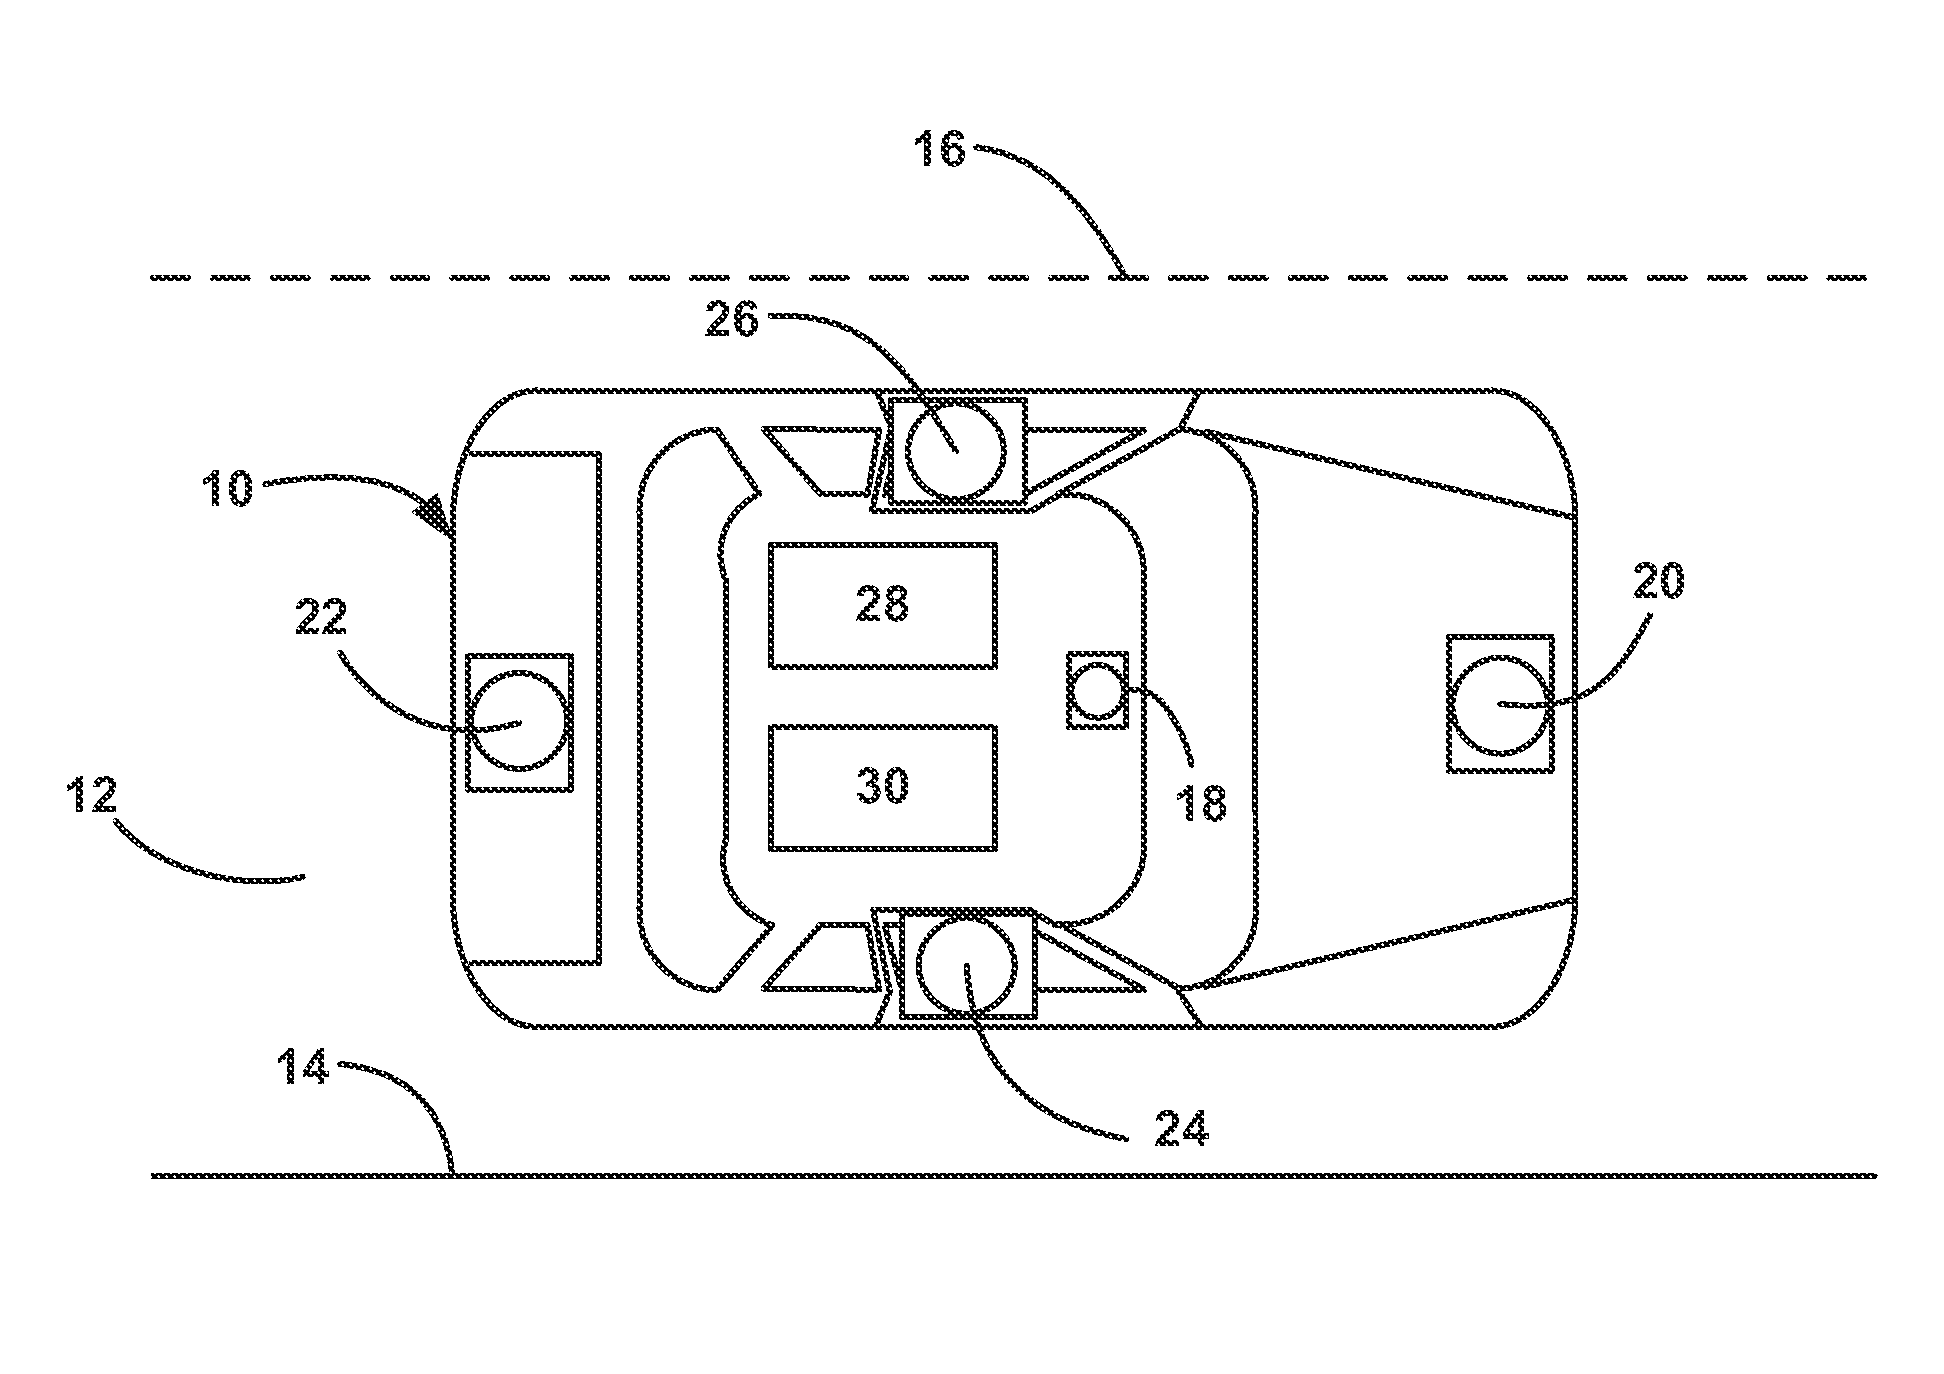 Full speed lane sensing with a surrounding view system